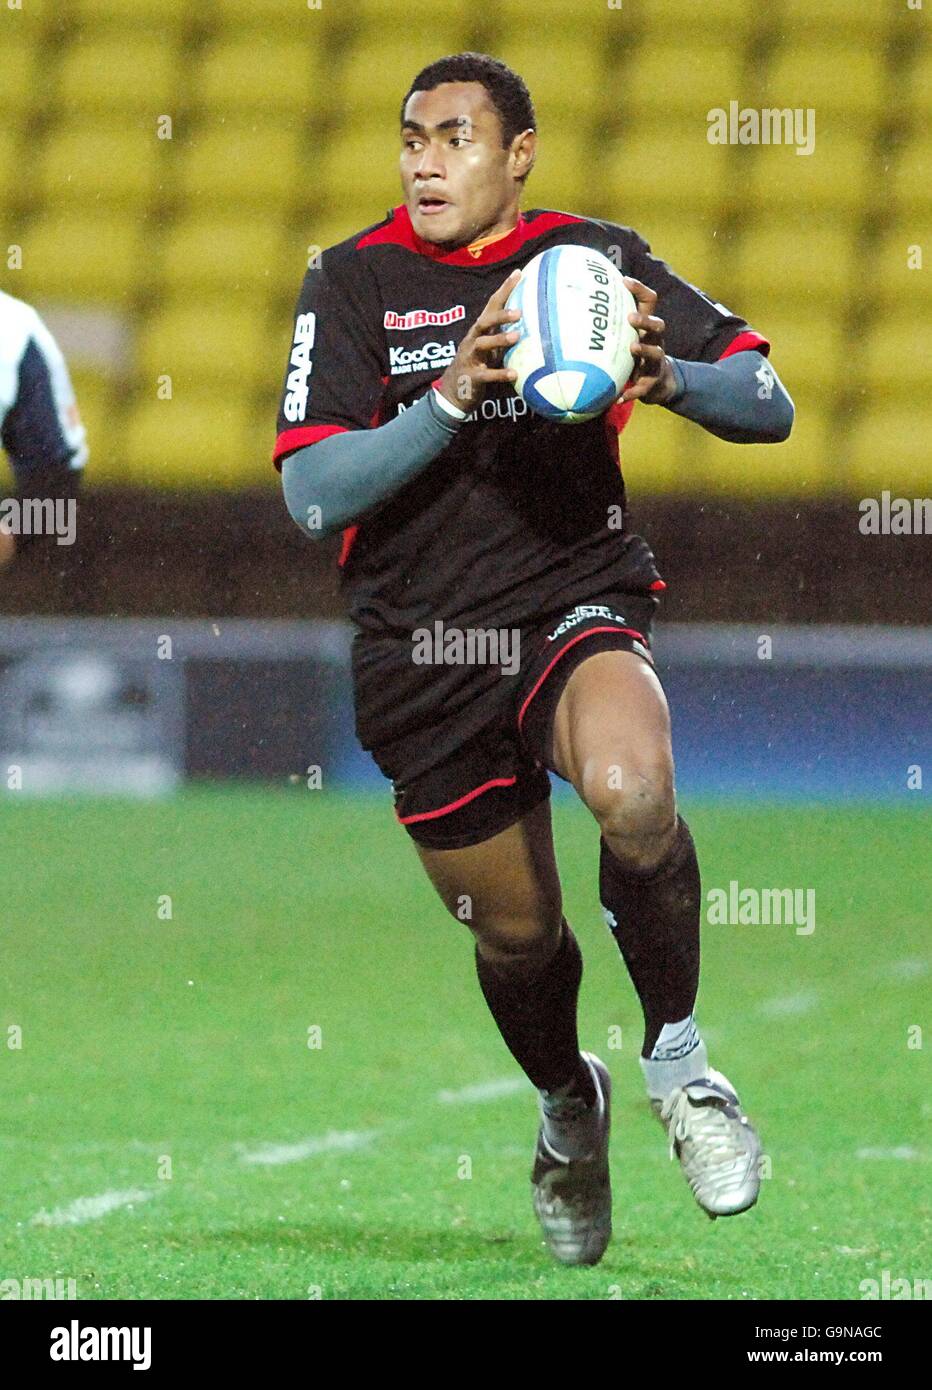 Rugby Union - European Challenge Cup - 2 Piscina - Saraceni v G.R.A.N Parma  - Vicarage Road Stadium Foto stock - Alamy